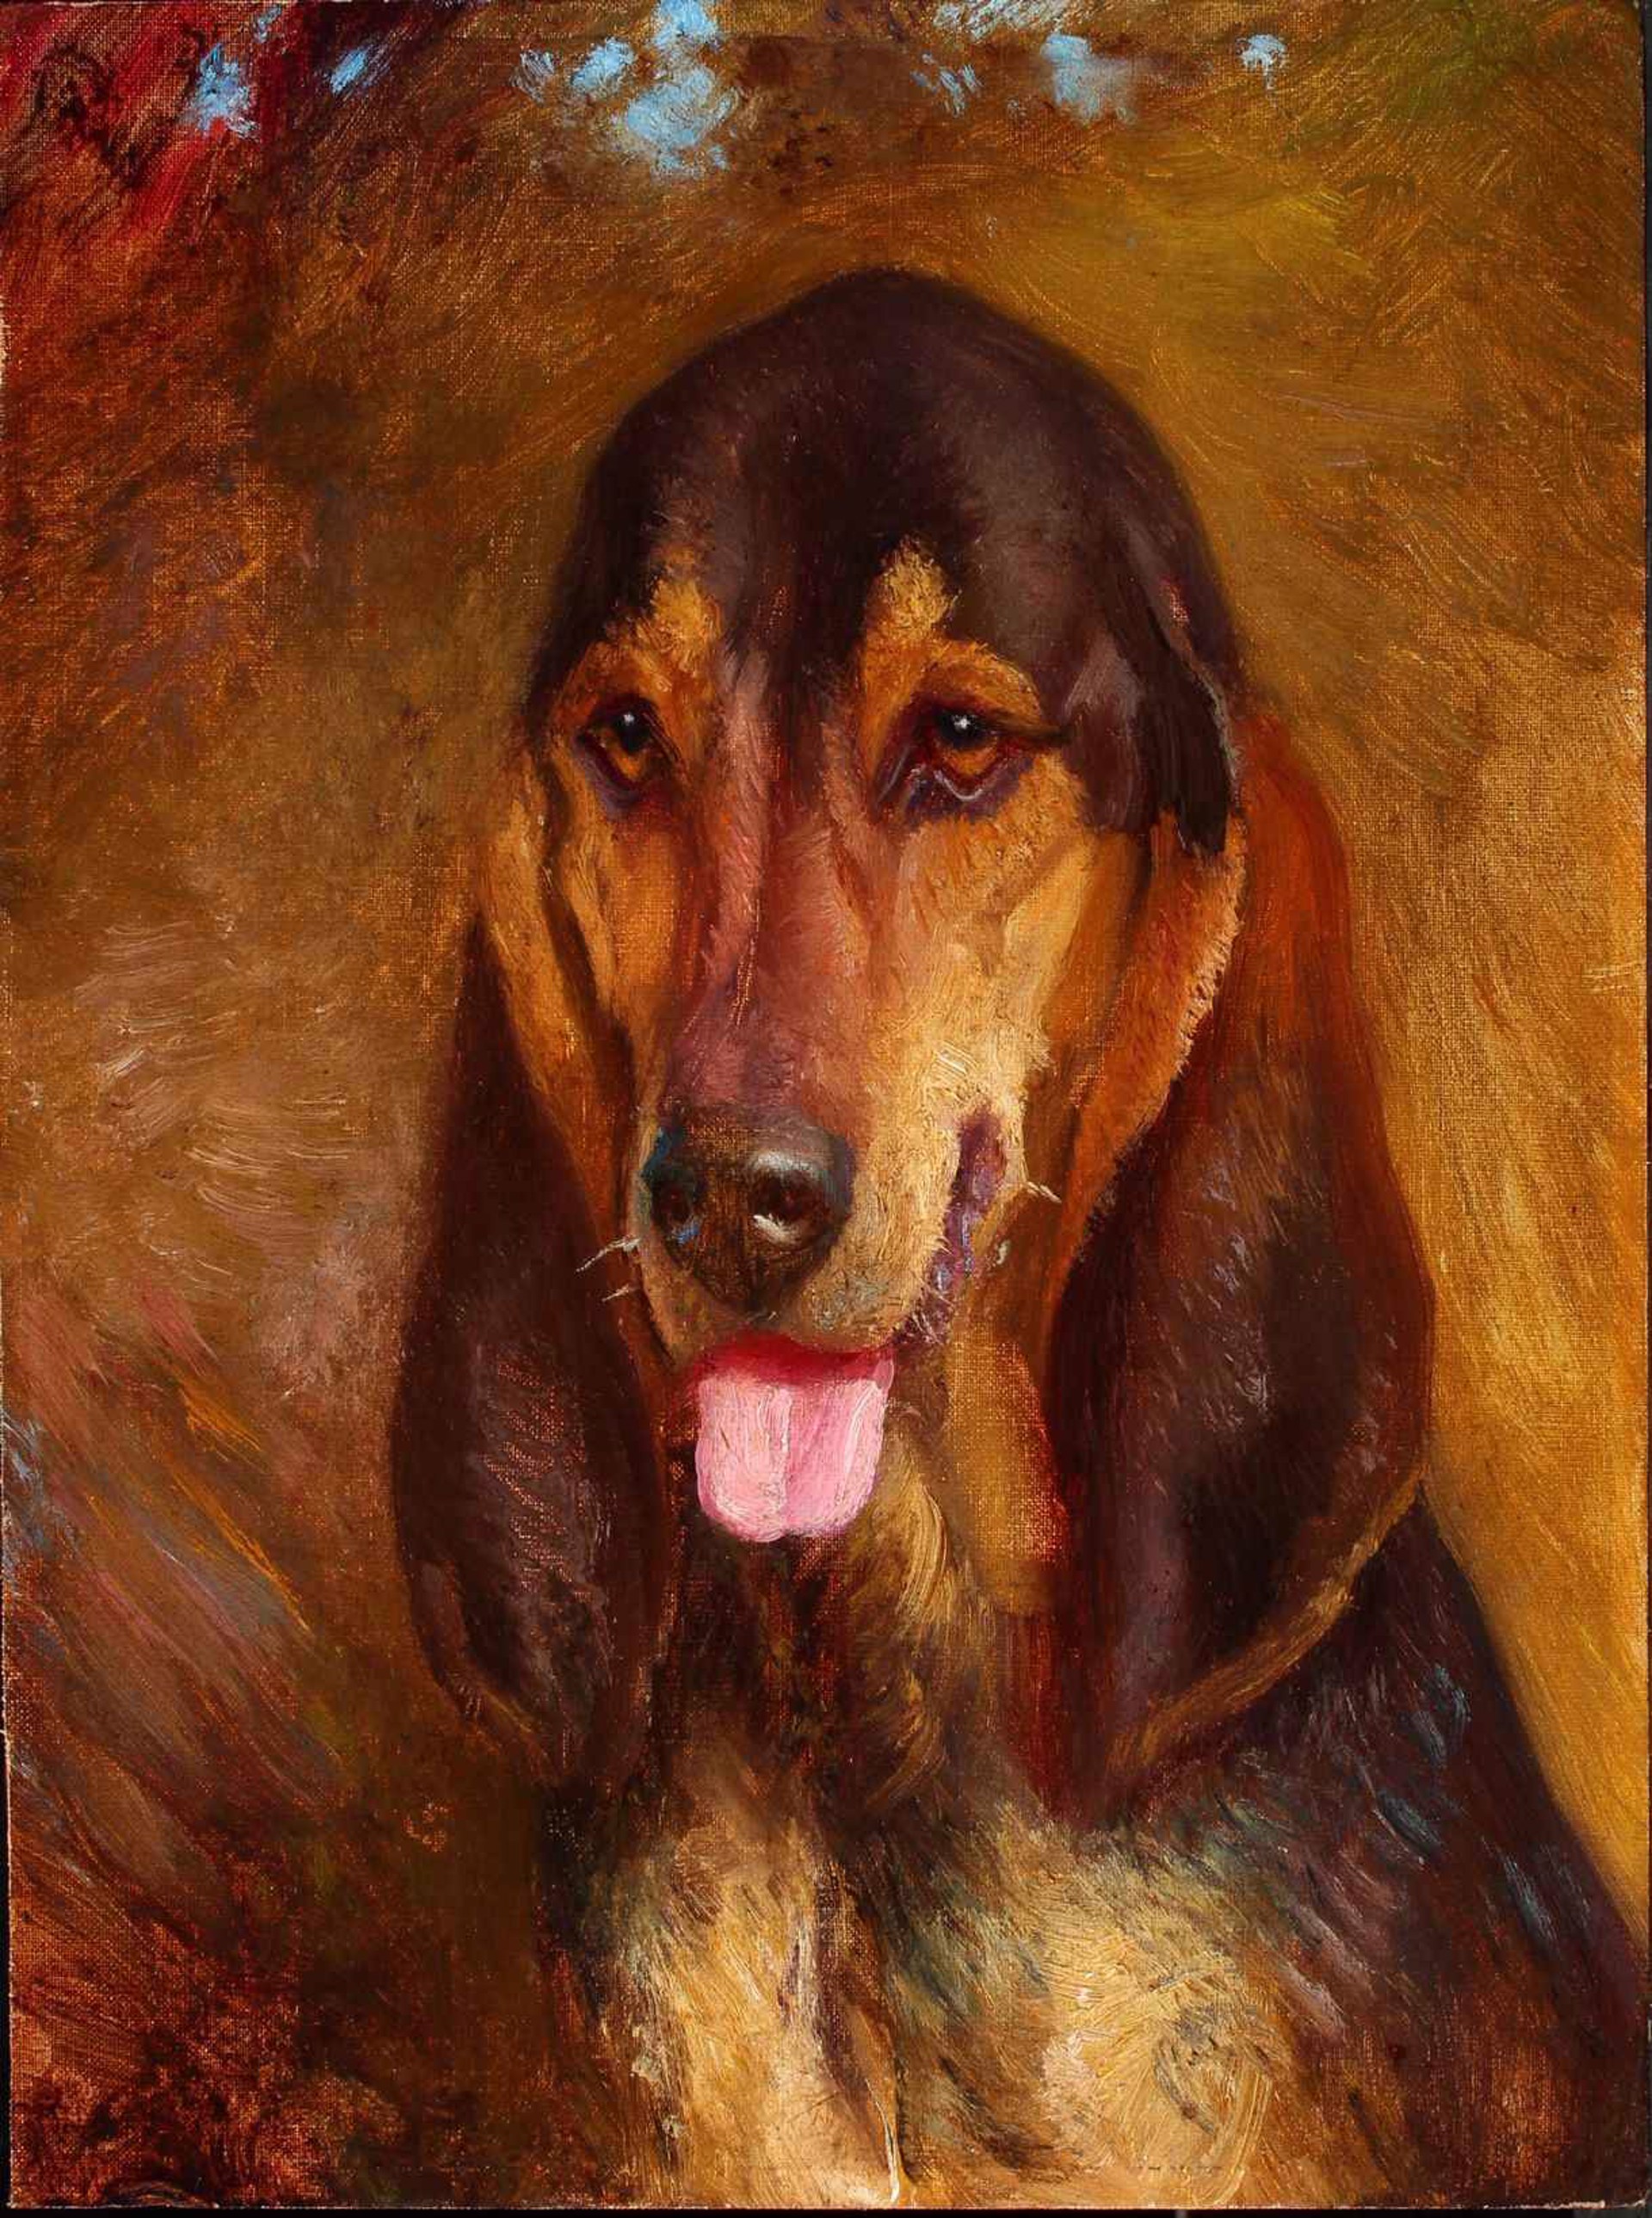 Virginia Hound by Henry Rankin Poore